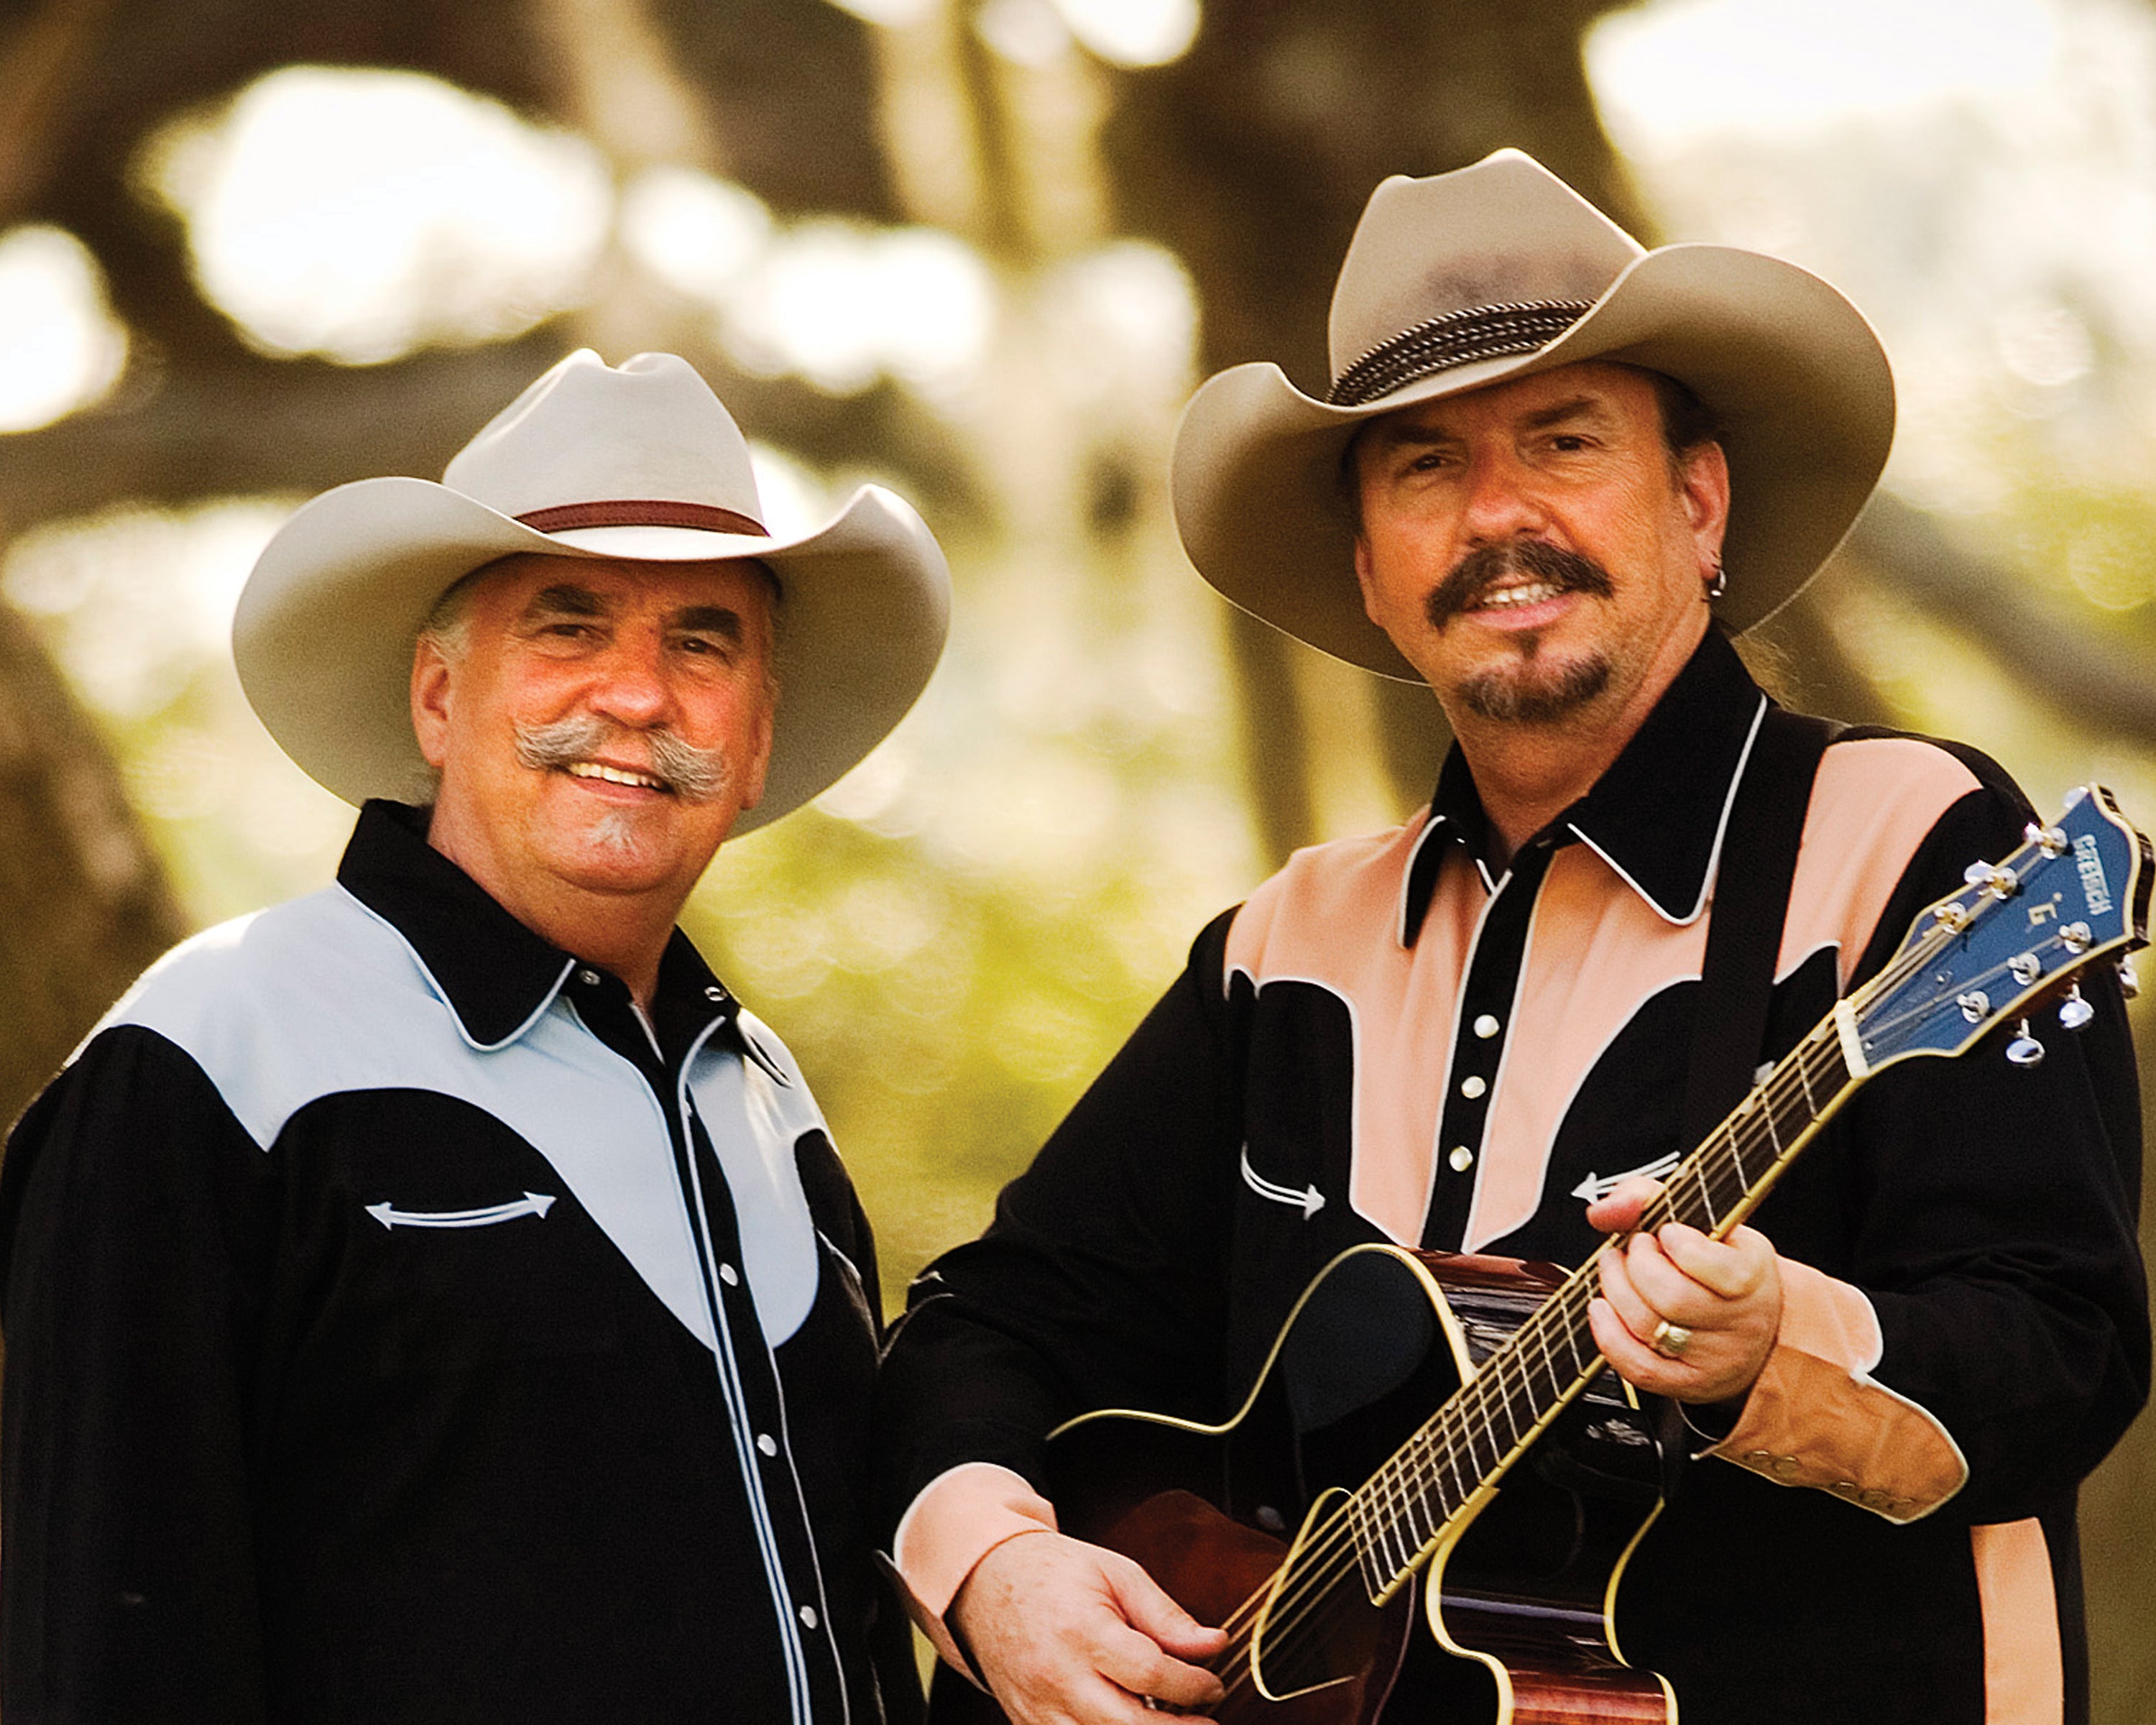 Bellamy Brothers in Las Vegas promo photo for Exclusive presale offer code